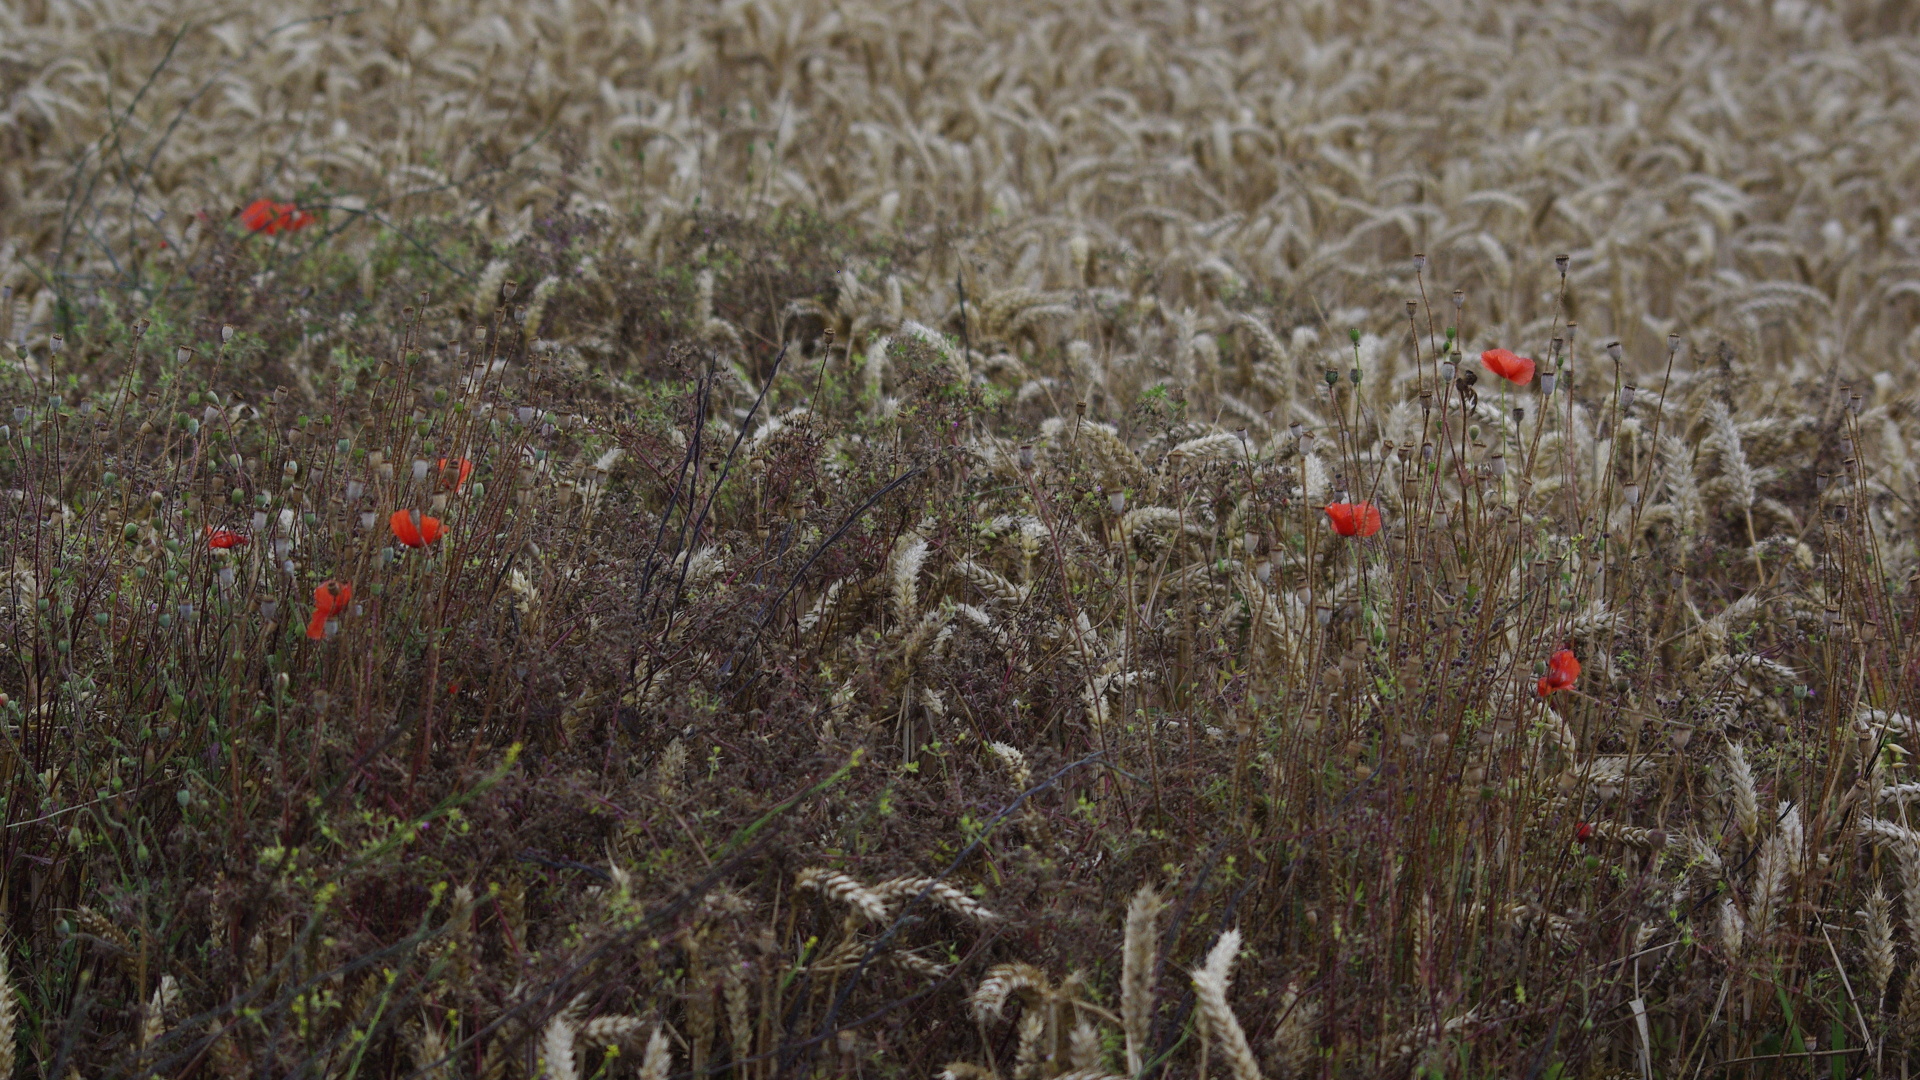 Poppies in Wheat